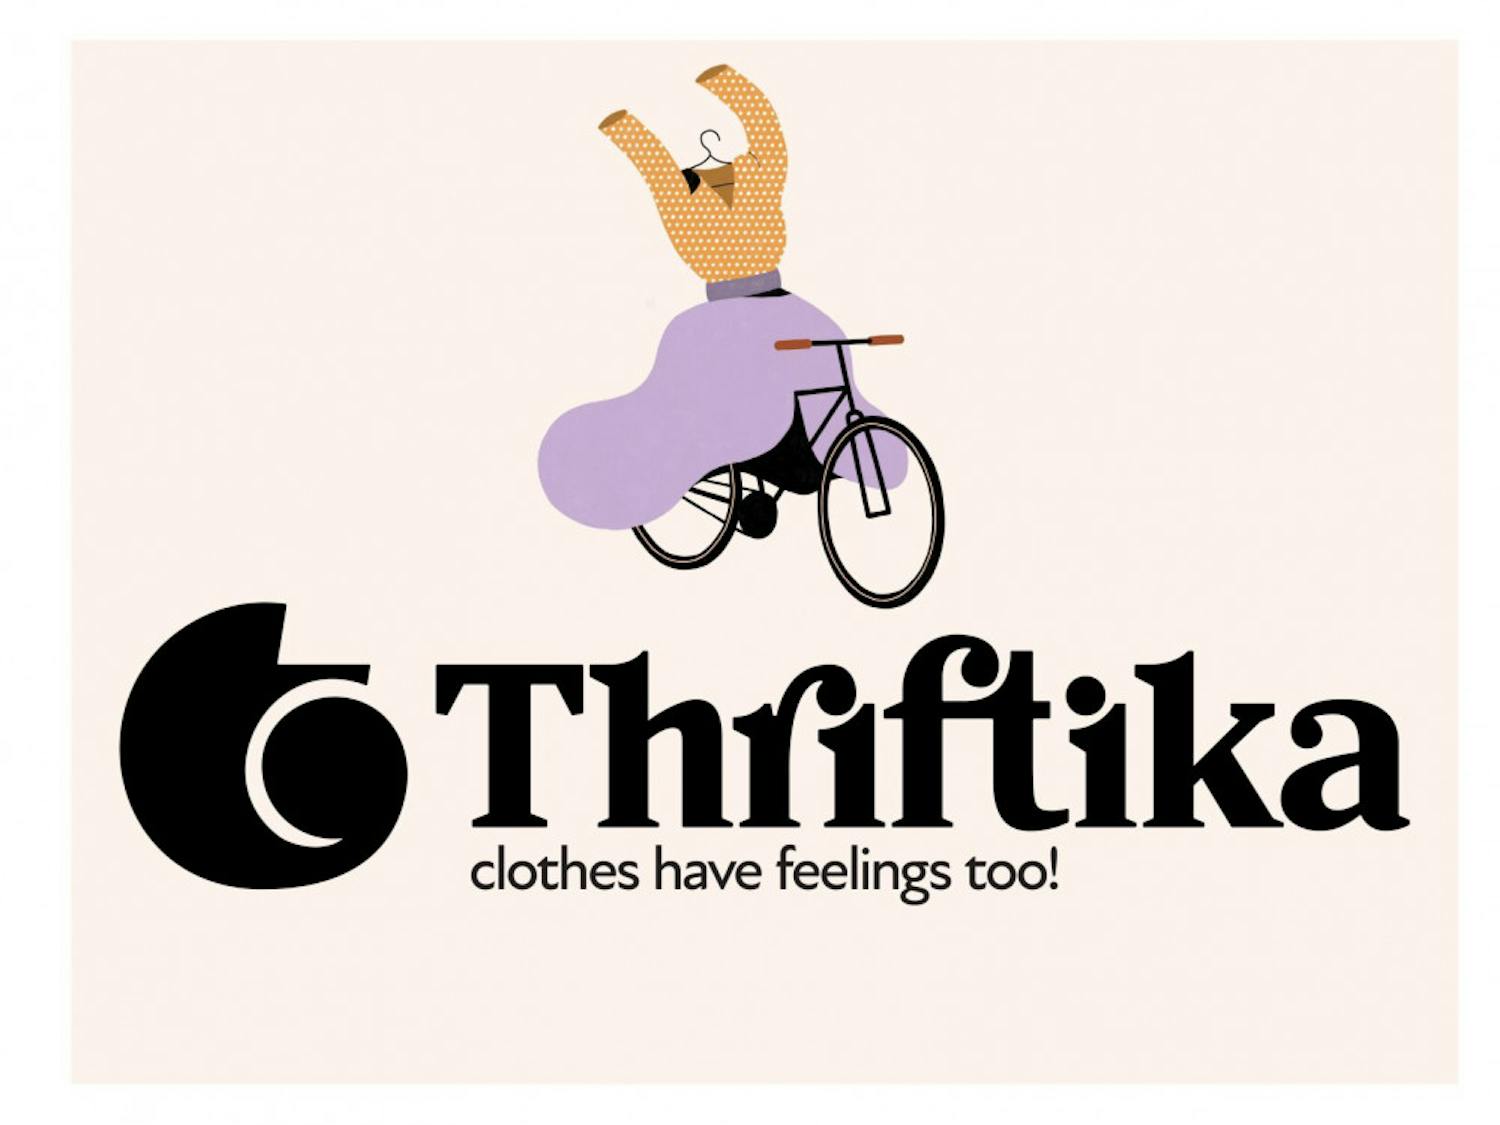 Maria Blokhina, a 25-year-old UF graphic design graduate student, created Thriftika to encourage fashion consumers to shop ethically through trade.&nbsp;